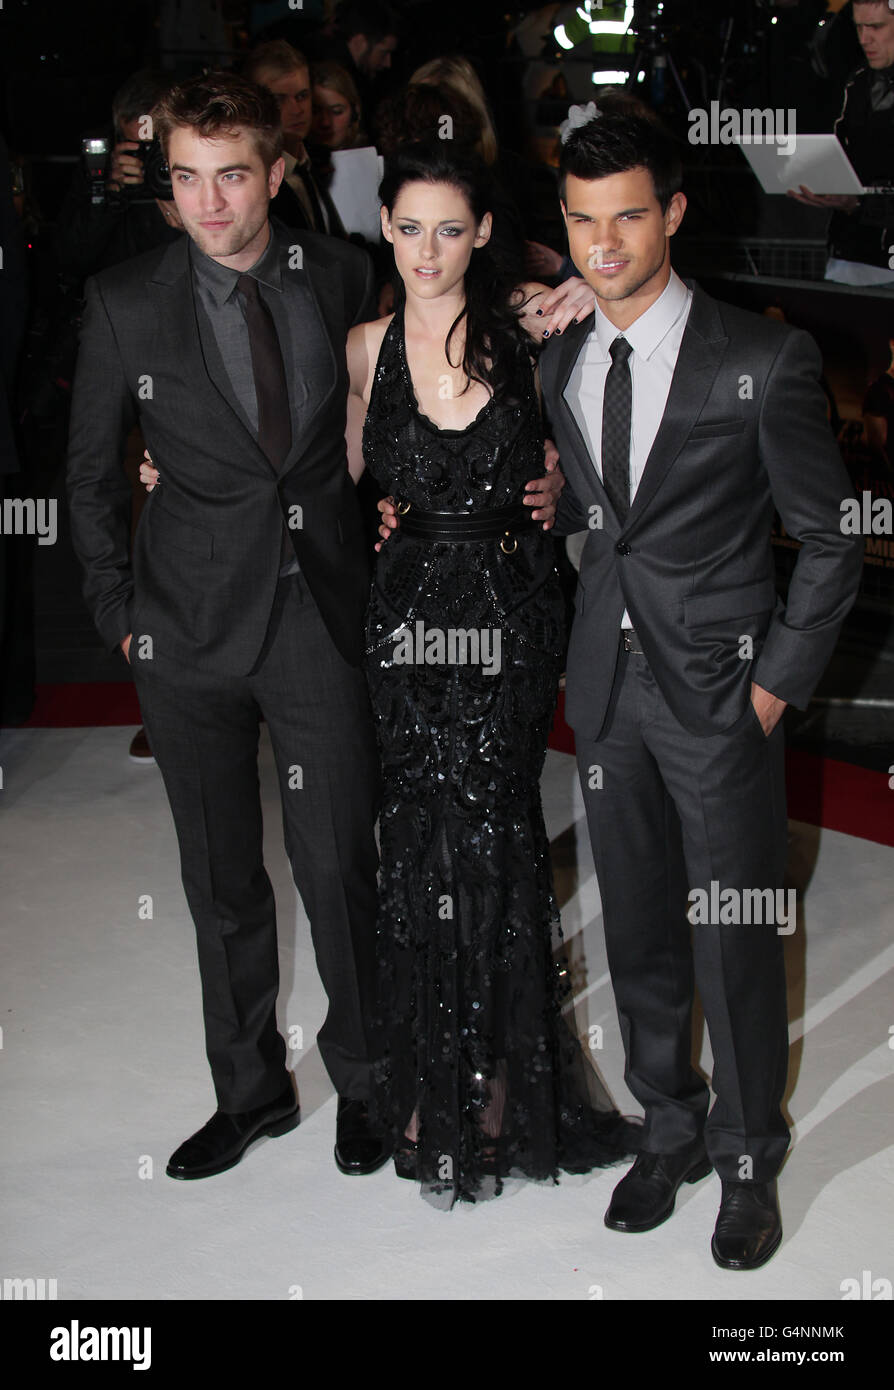 Robert Pattinson, Kristen Stewart and Taylor Lautner arriving for the UK premiere of The Twilight Saga: Breaking Dawn Part 1, at the Westfield Stratford City, Stratford, London. Stock Photo